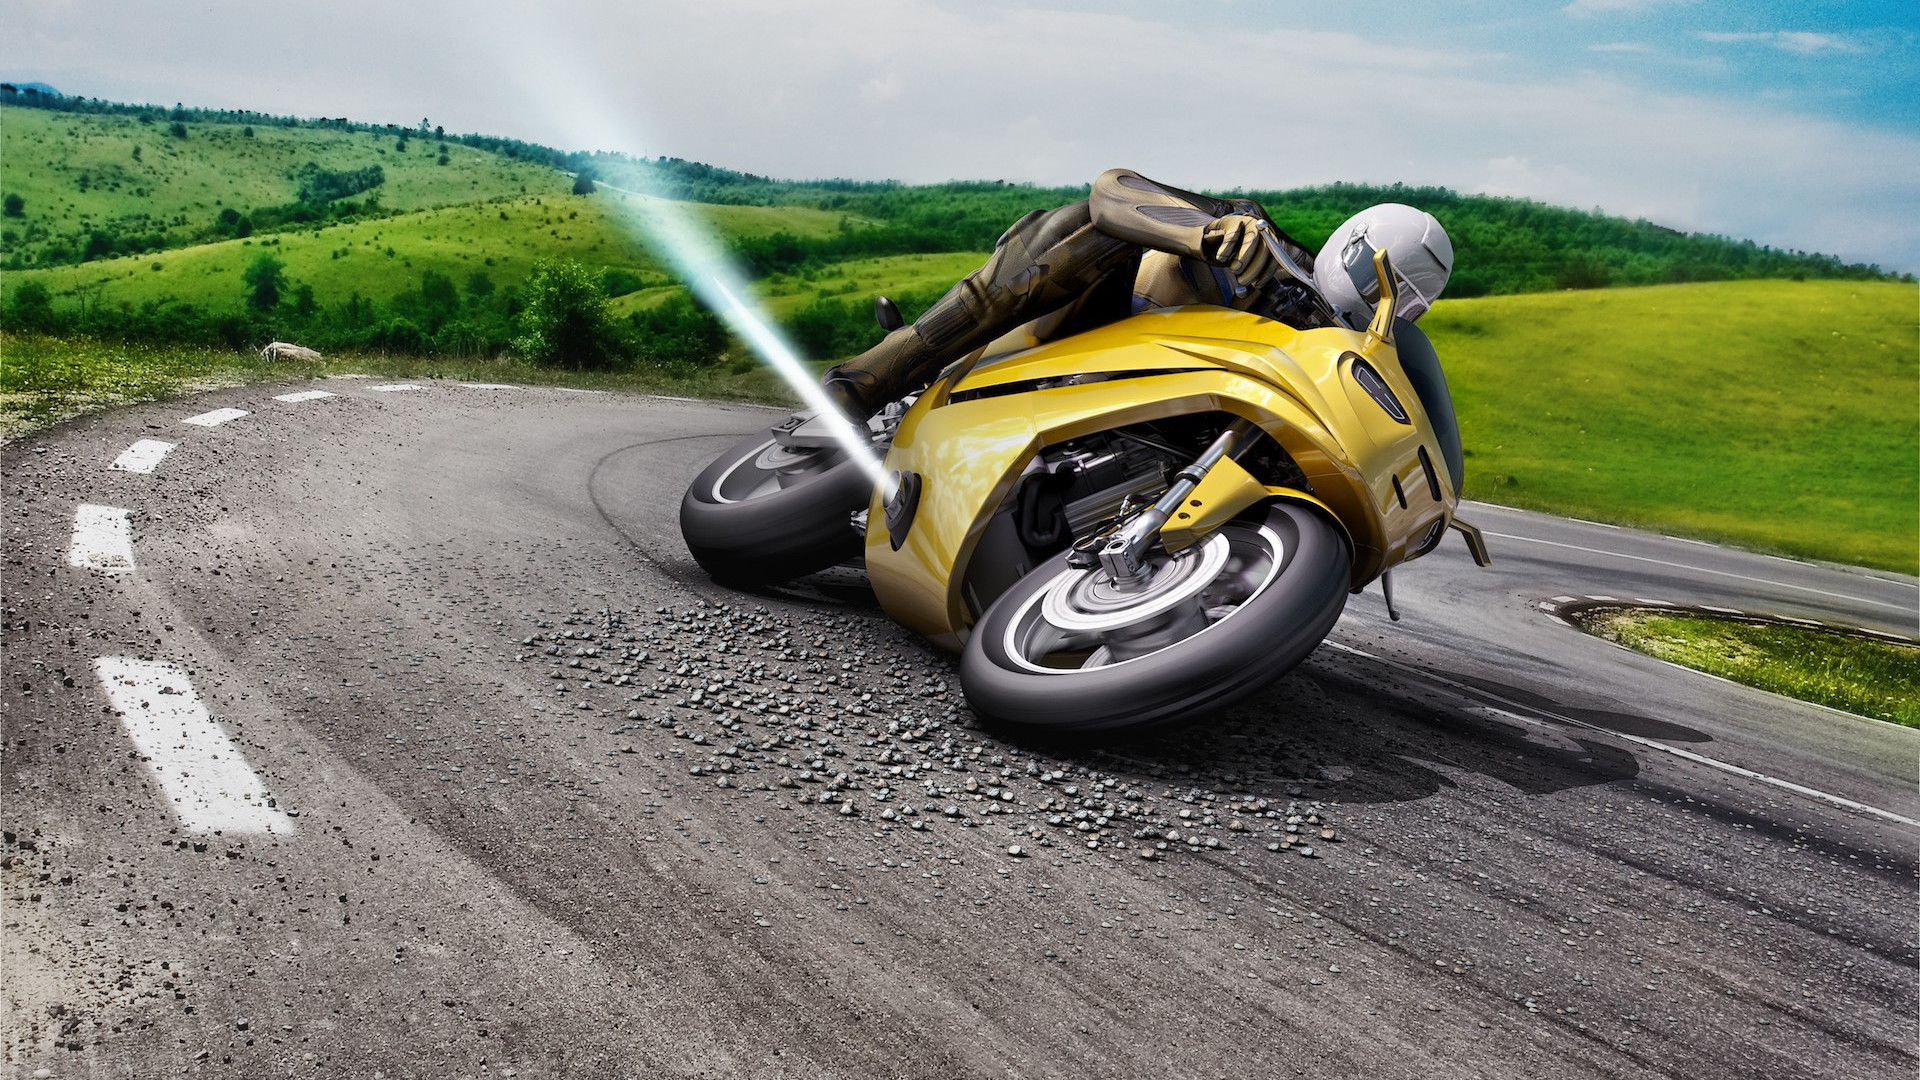 Bosch working on air jets to stop motorcycle crashes